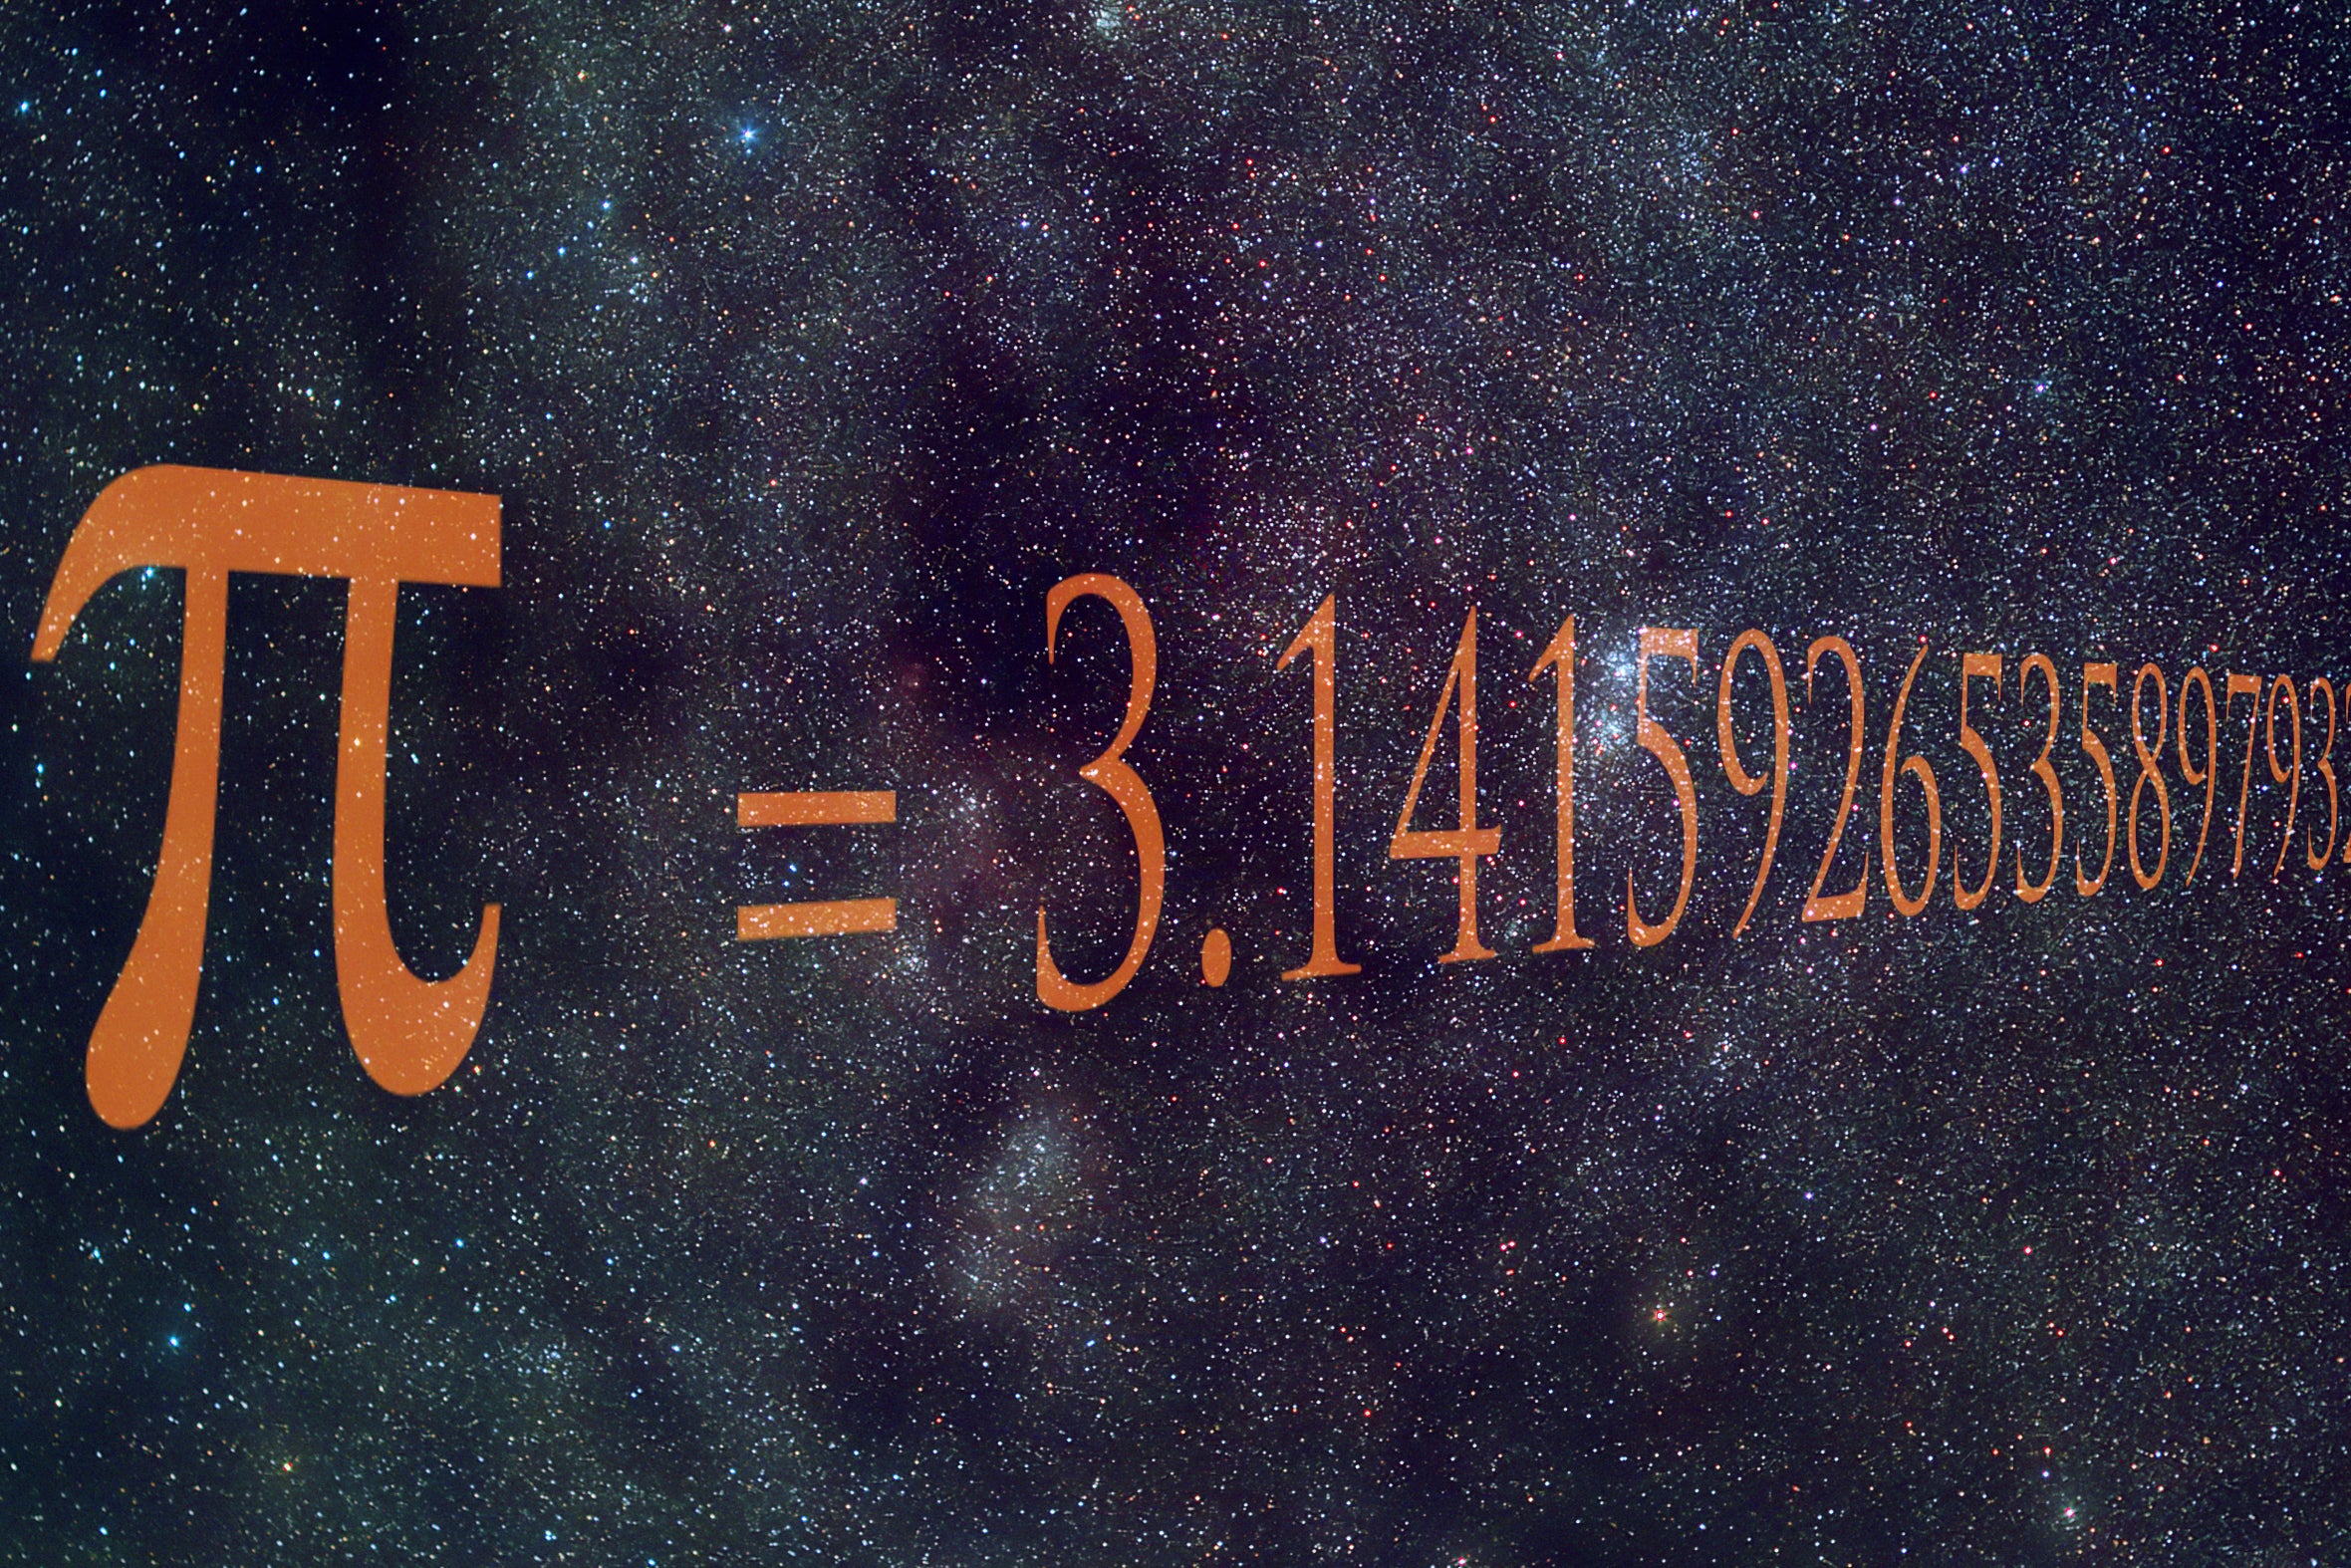 Pi in the Sky: General Relativity Passes the Ratio’s Test